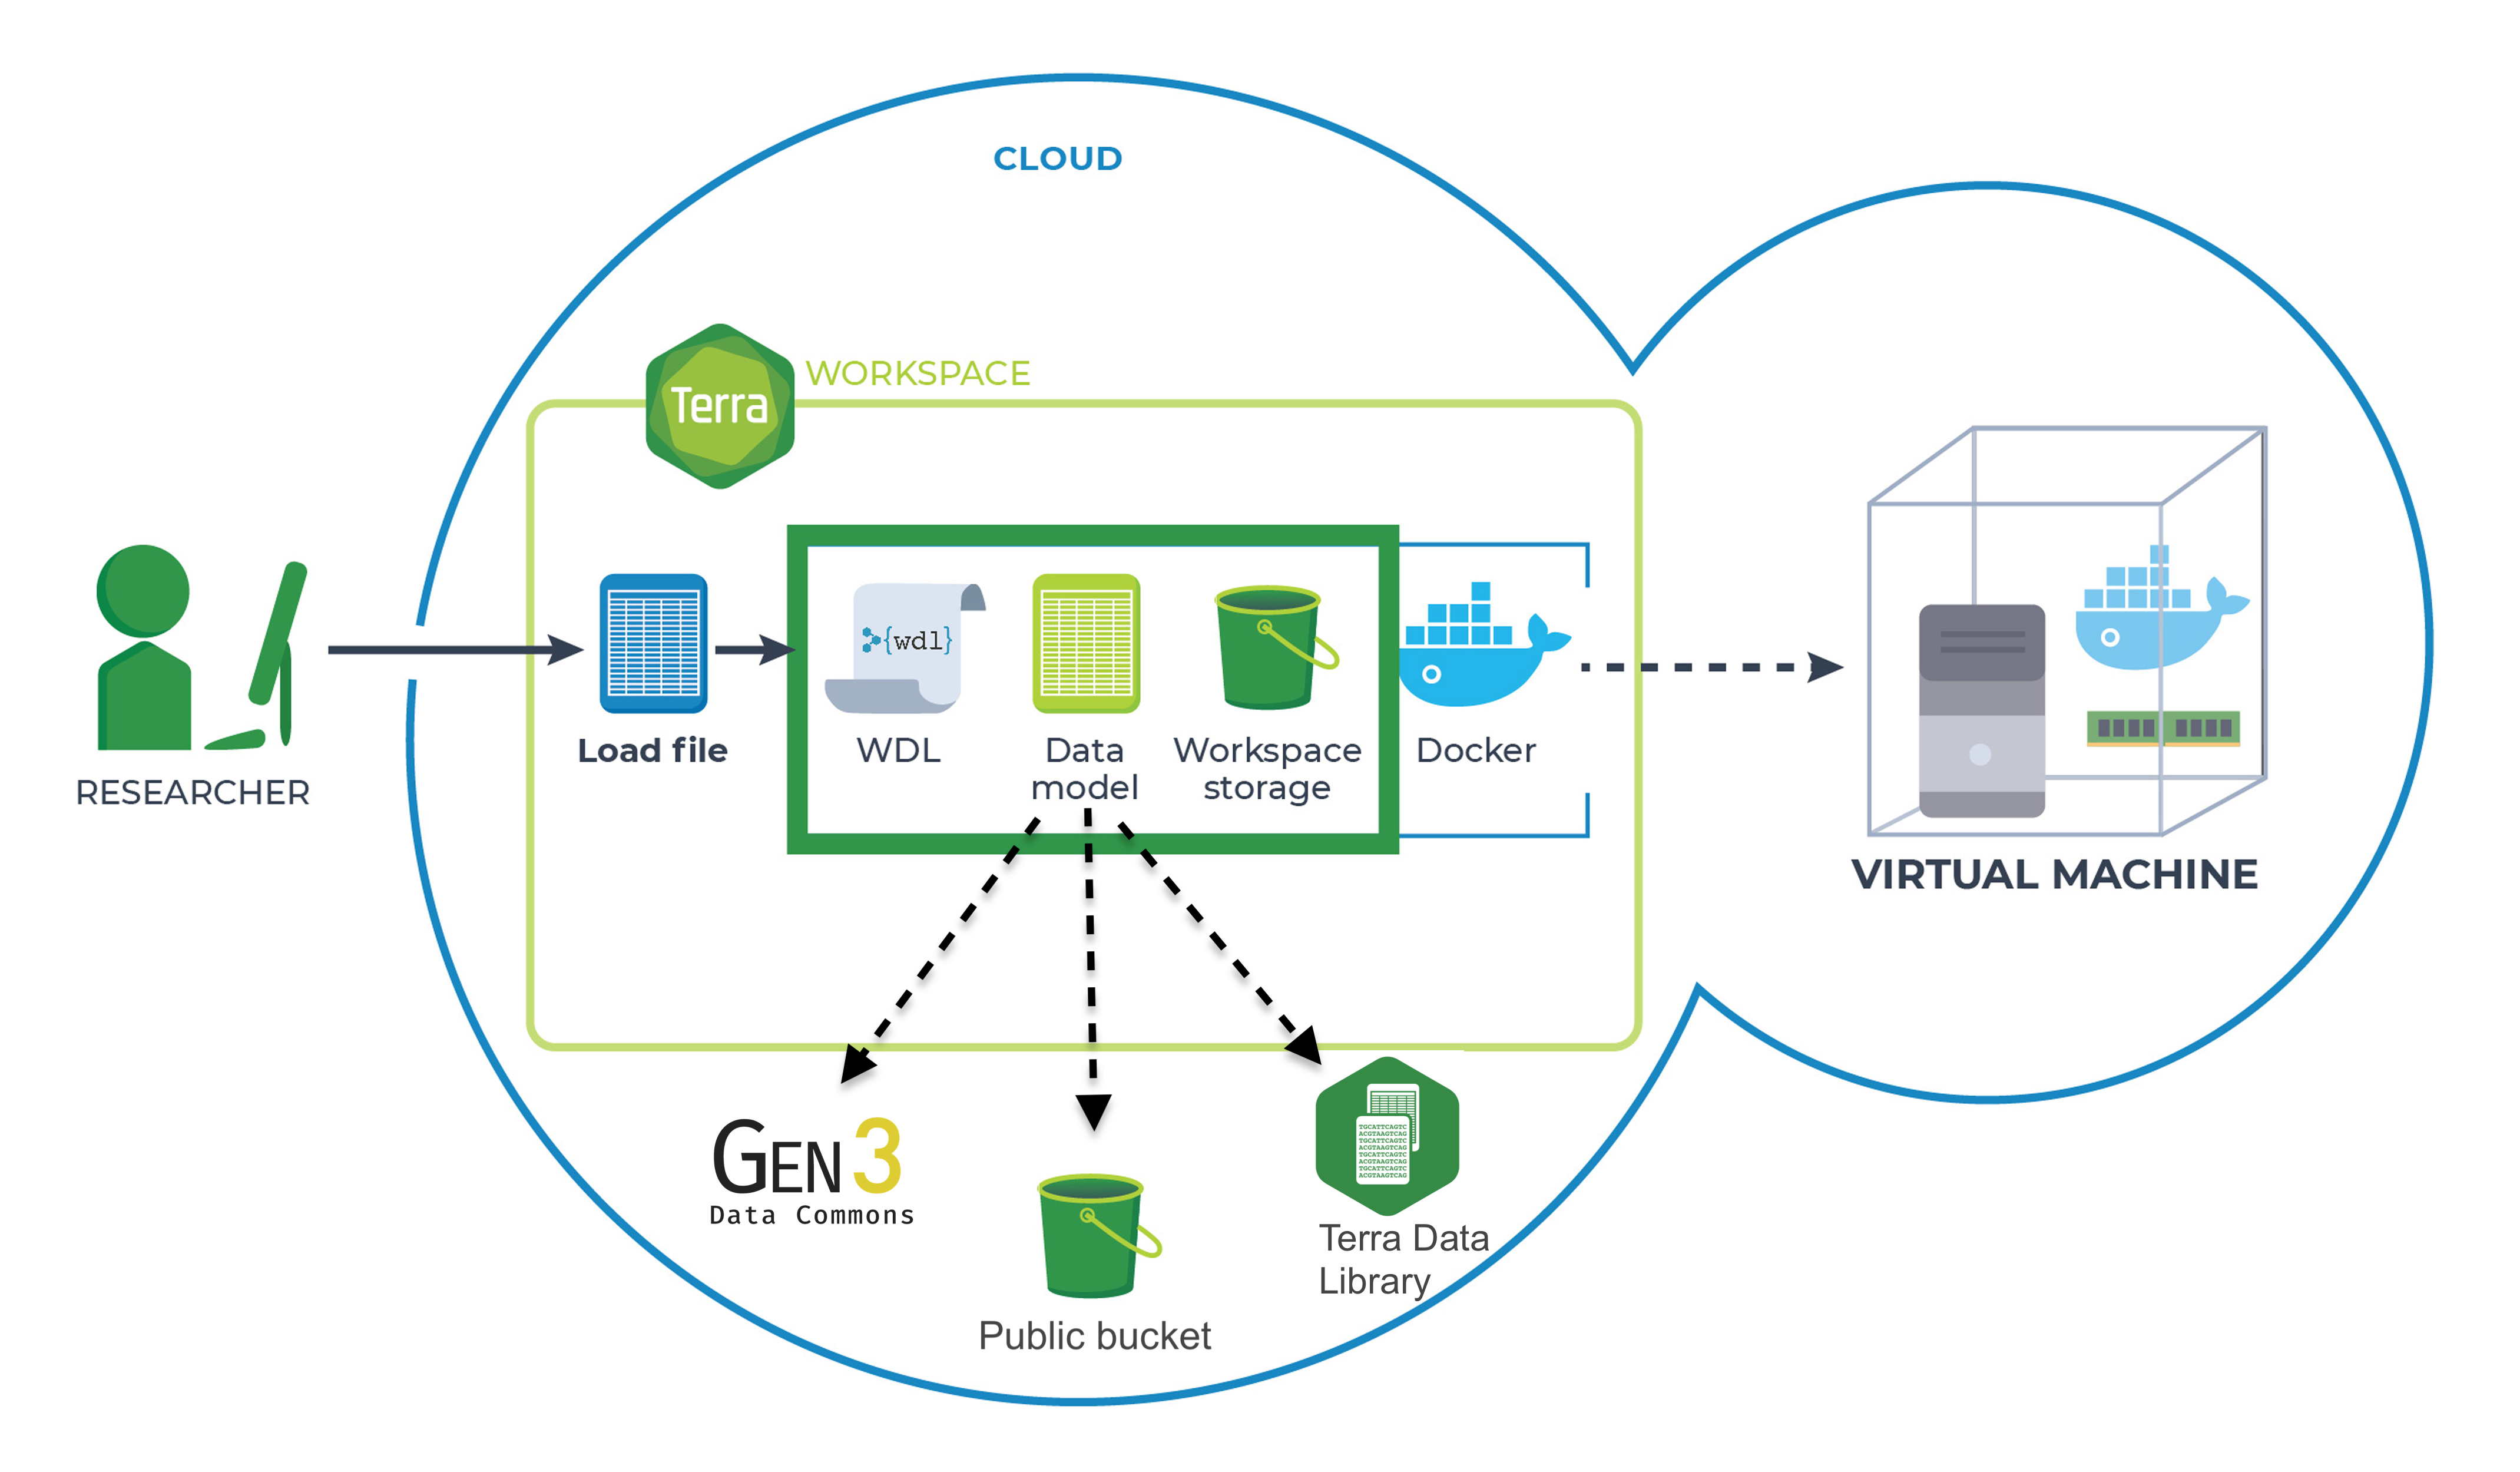 Diagram of Terra workspace components load file, WDL workflow, data table, workspace storage bucket and a docker container beside a virtual machine also in the cloud. The workspace table points to data in Gen3, in a public bucket, and in the Terra data library, all outside the workspace but in the cloud. A researcher accesses all these resources from a computer